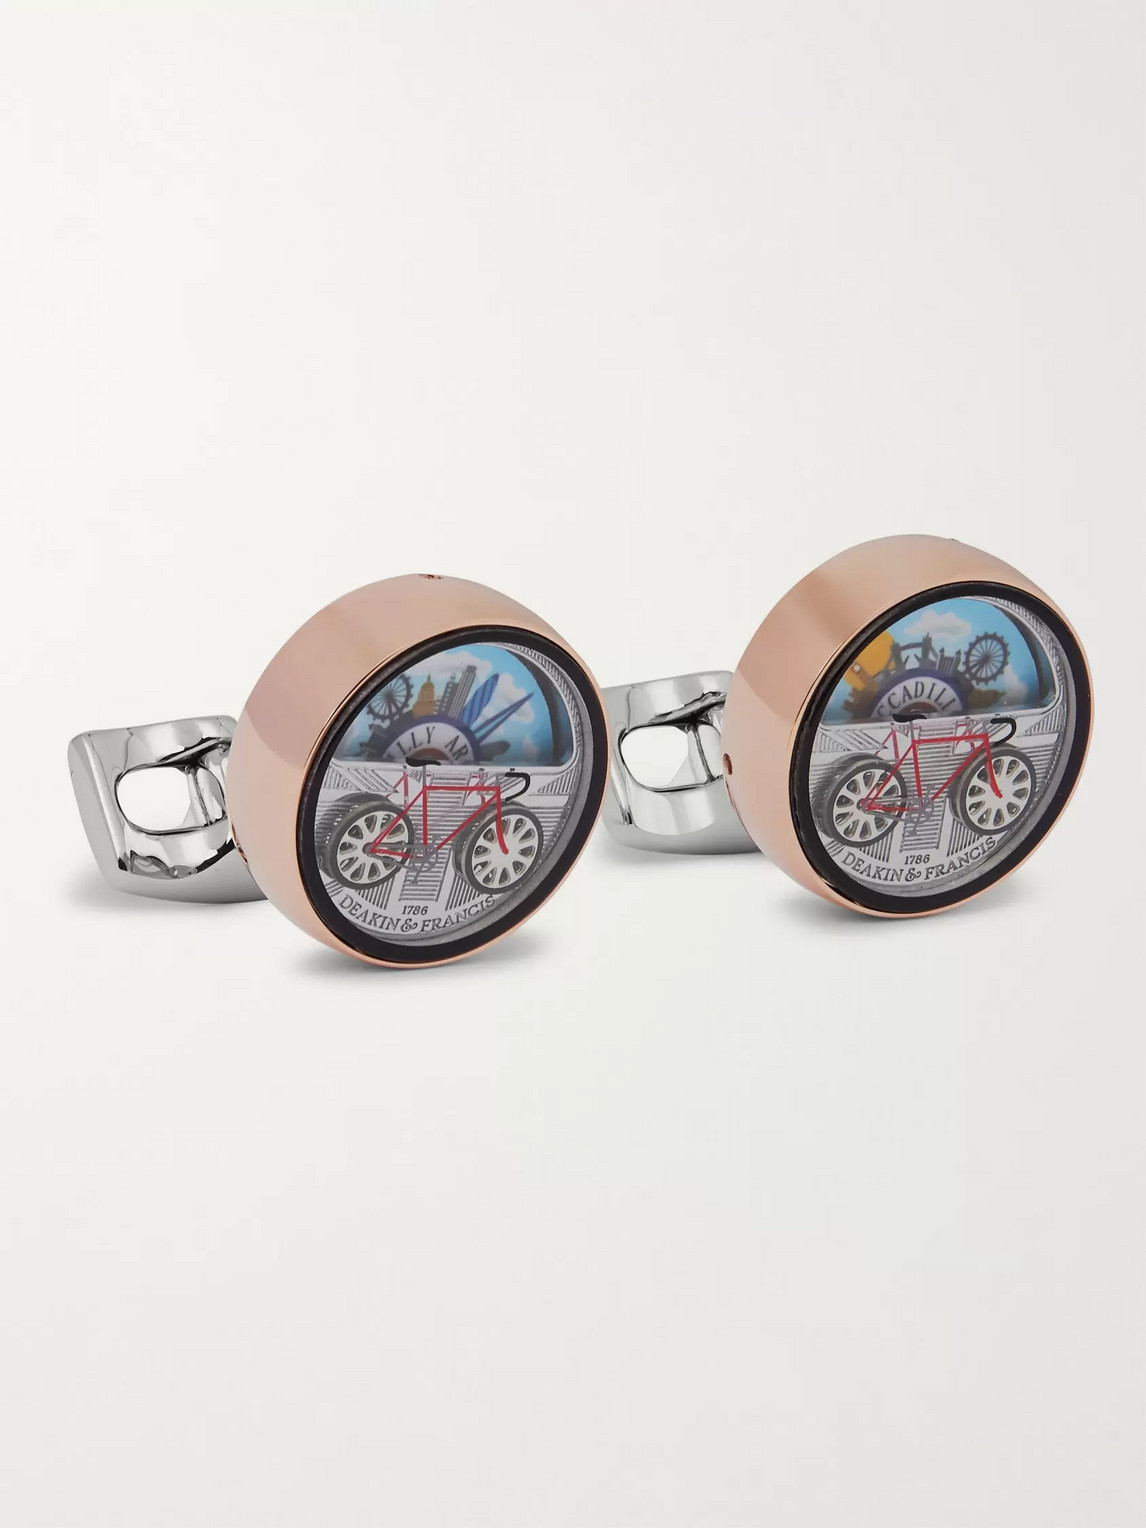 DEAKIN & FRANCIS MOVING LONDON SCENE ROSE GOLD AND SILVER-TONE CUFFLINKS